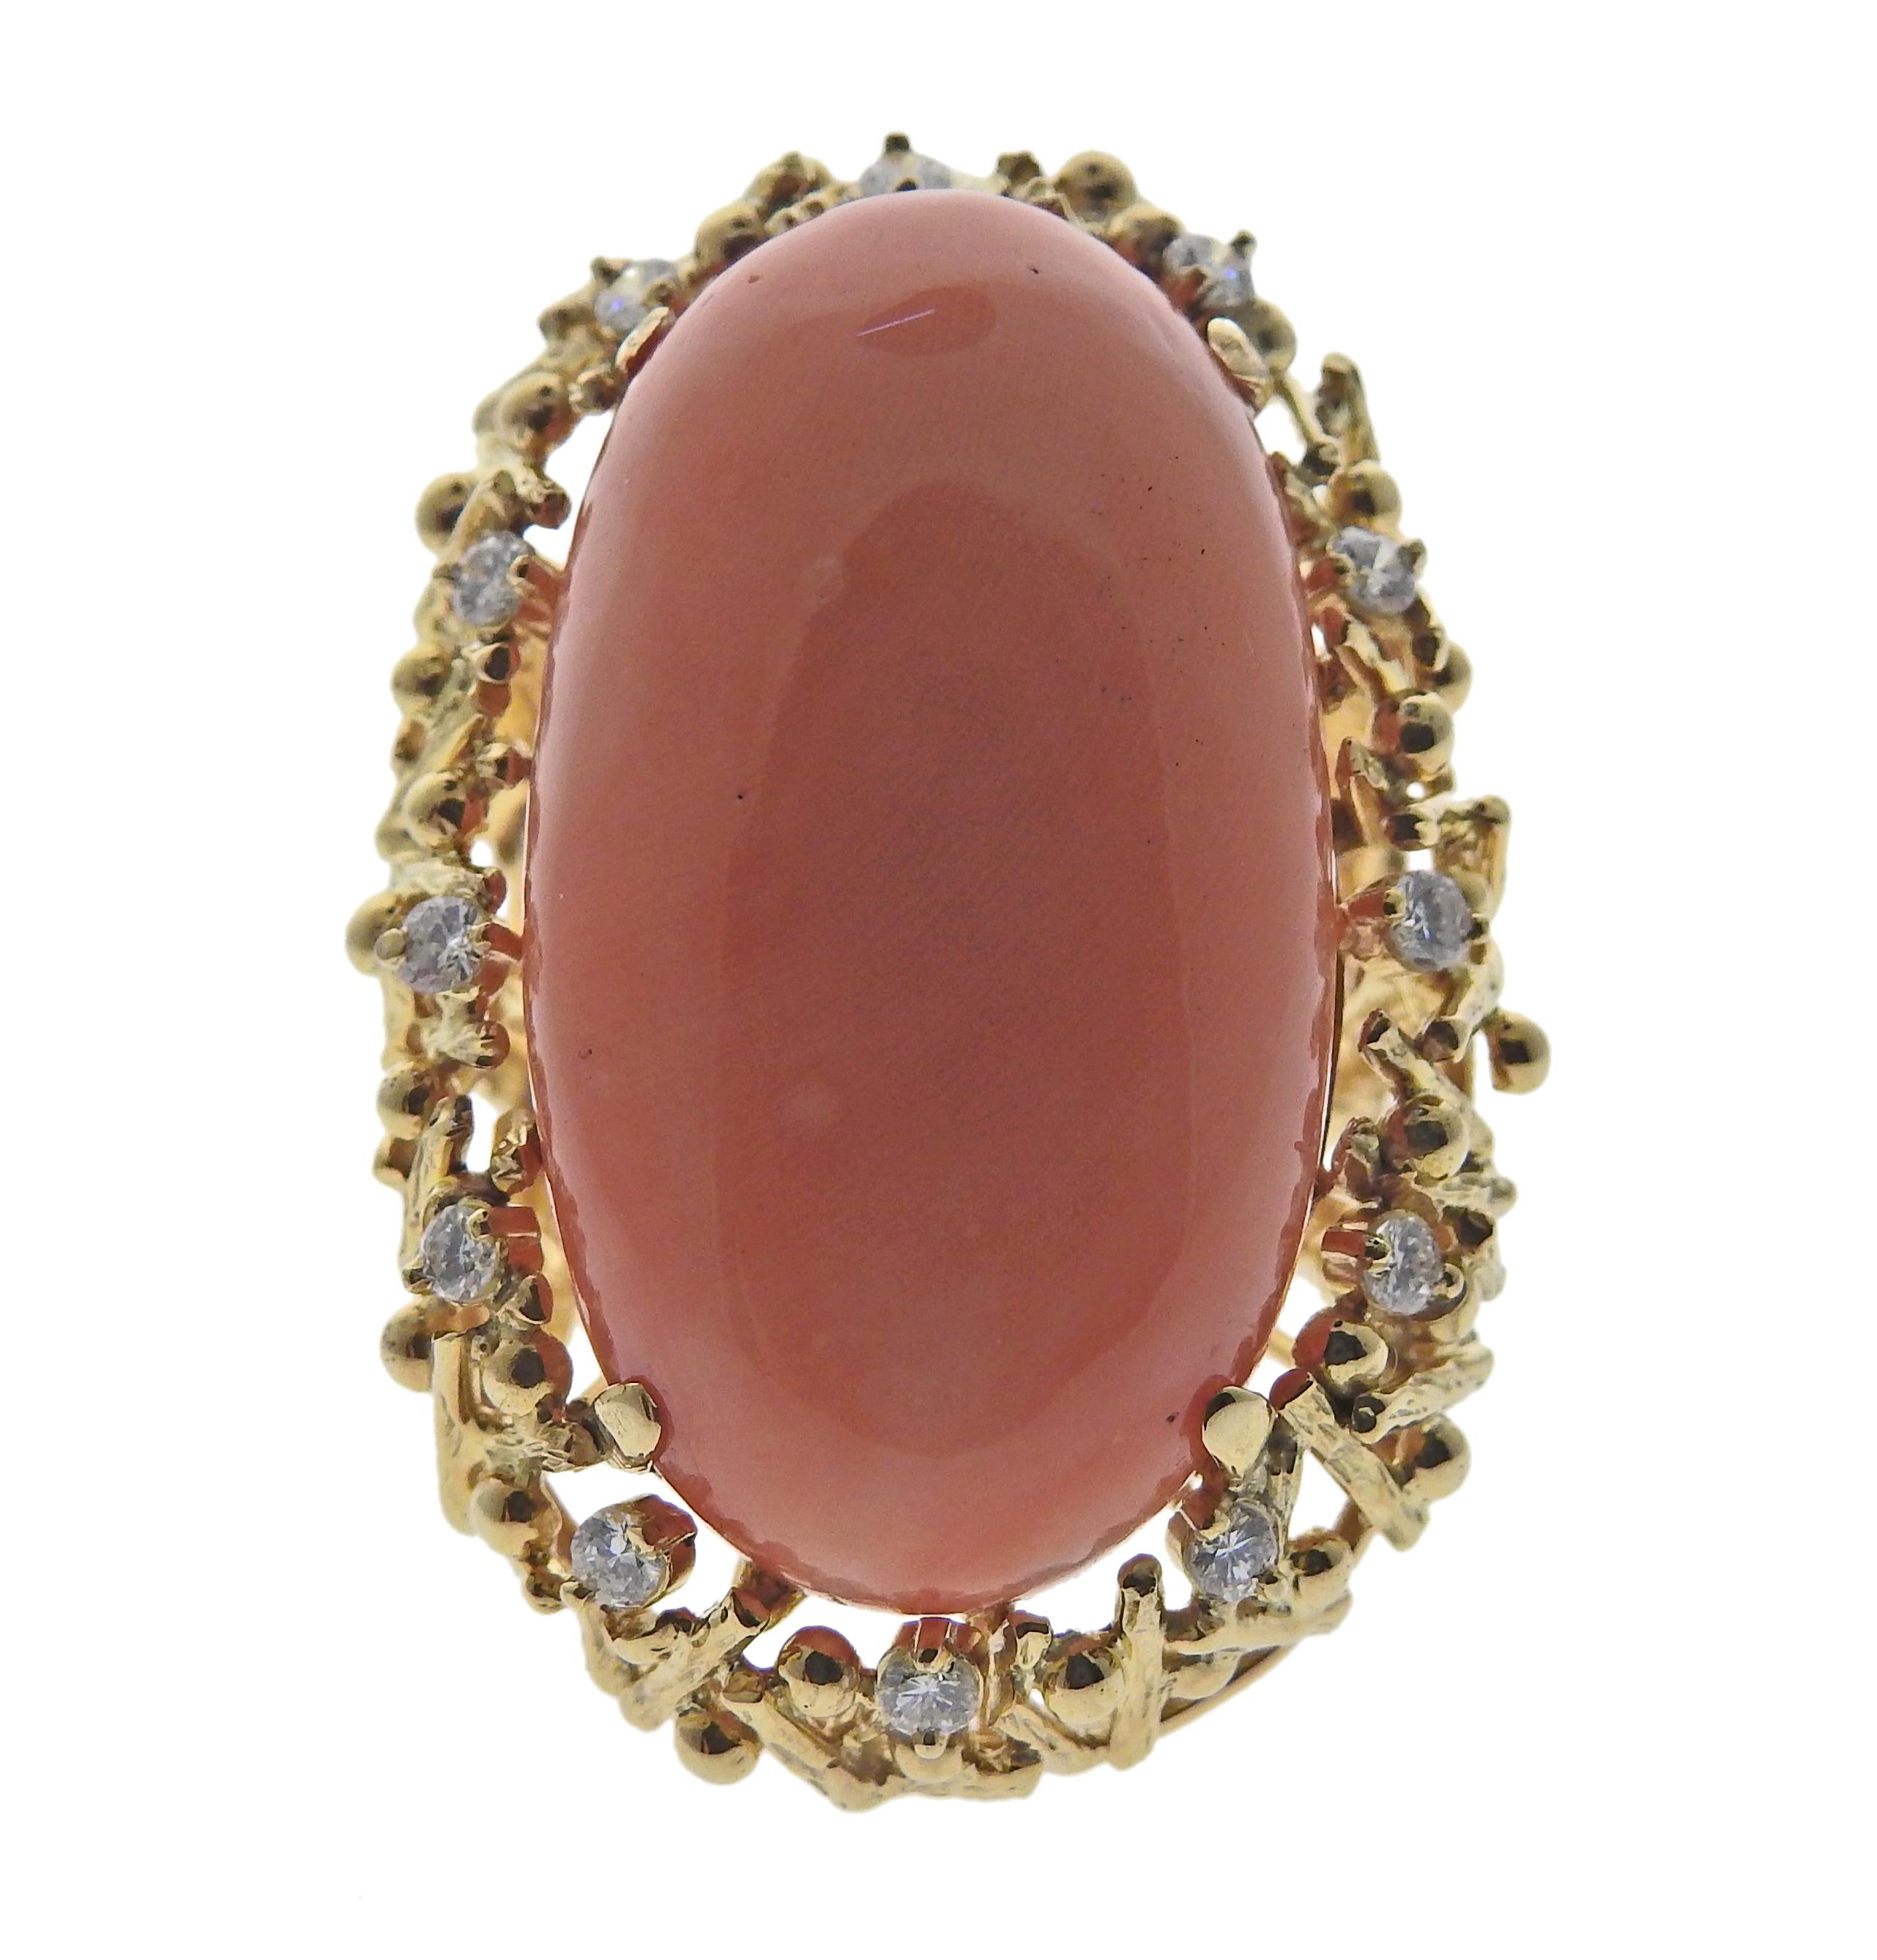 1970s gold diamond coral cocktail ring features approx 0.60ctw in VS1/SI1 H diamonds. Ring size 5 3/4, top of the ring measures 38mmx x25mm. Coral is 31.5mm x 18mm. Marked: 18k. Weight is 26.9 grams.